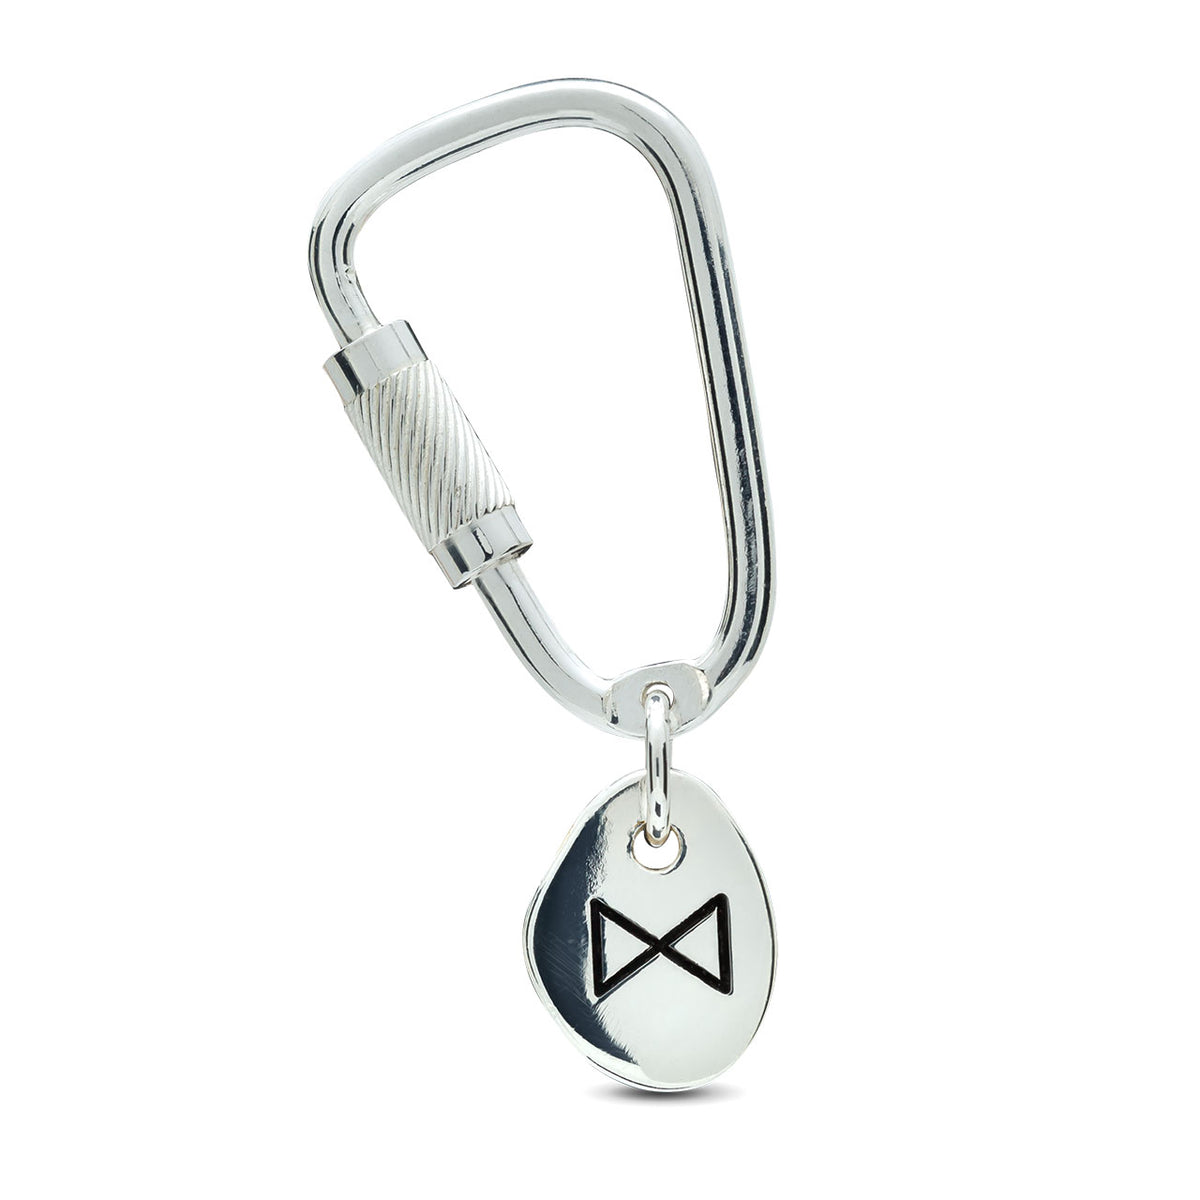 Travel Rune Lucky Silver Keyring with working silver Carabiner Climbing lock from Off The Map Jewellery Brighton